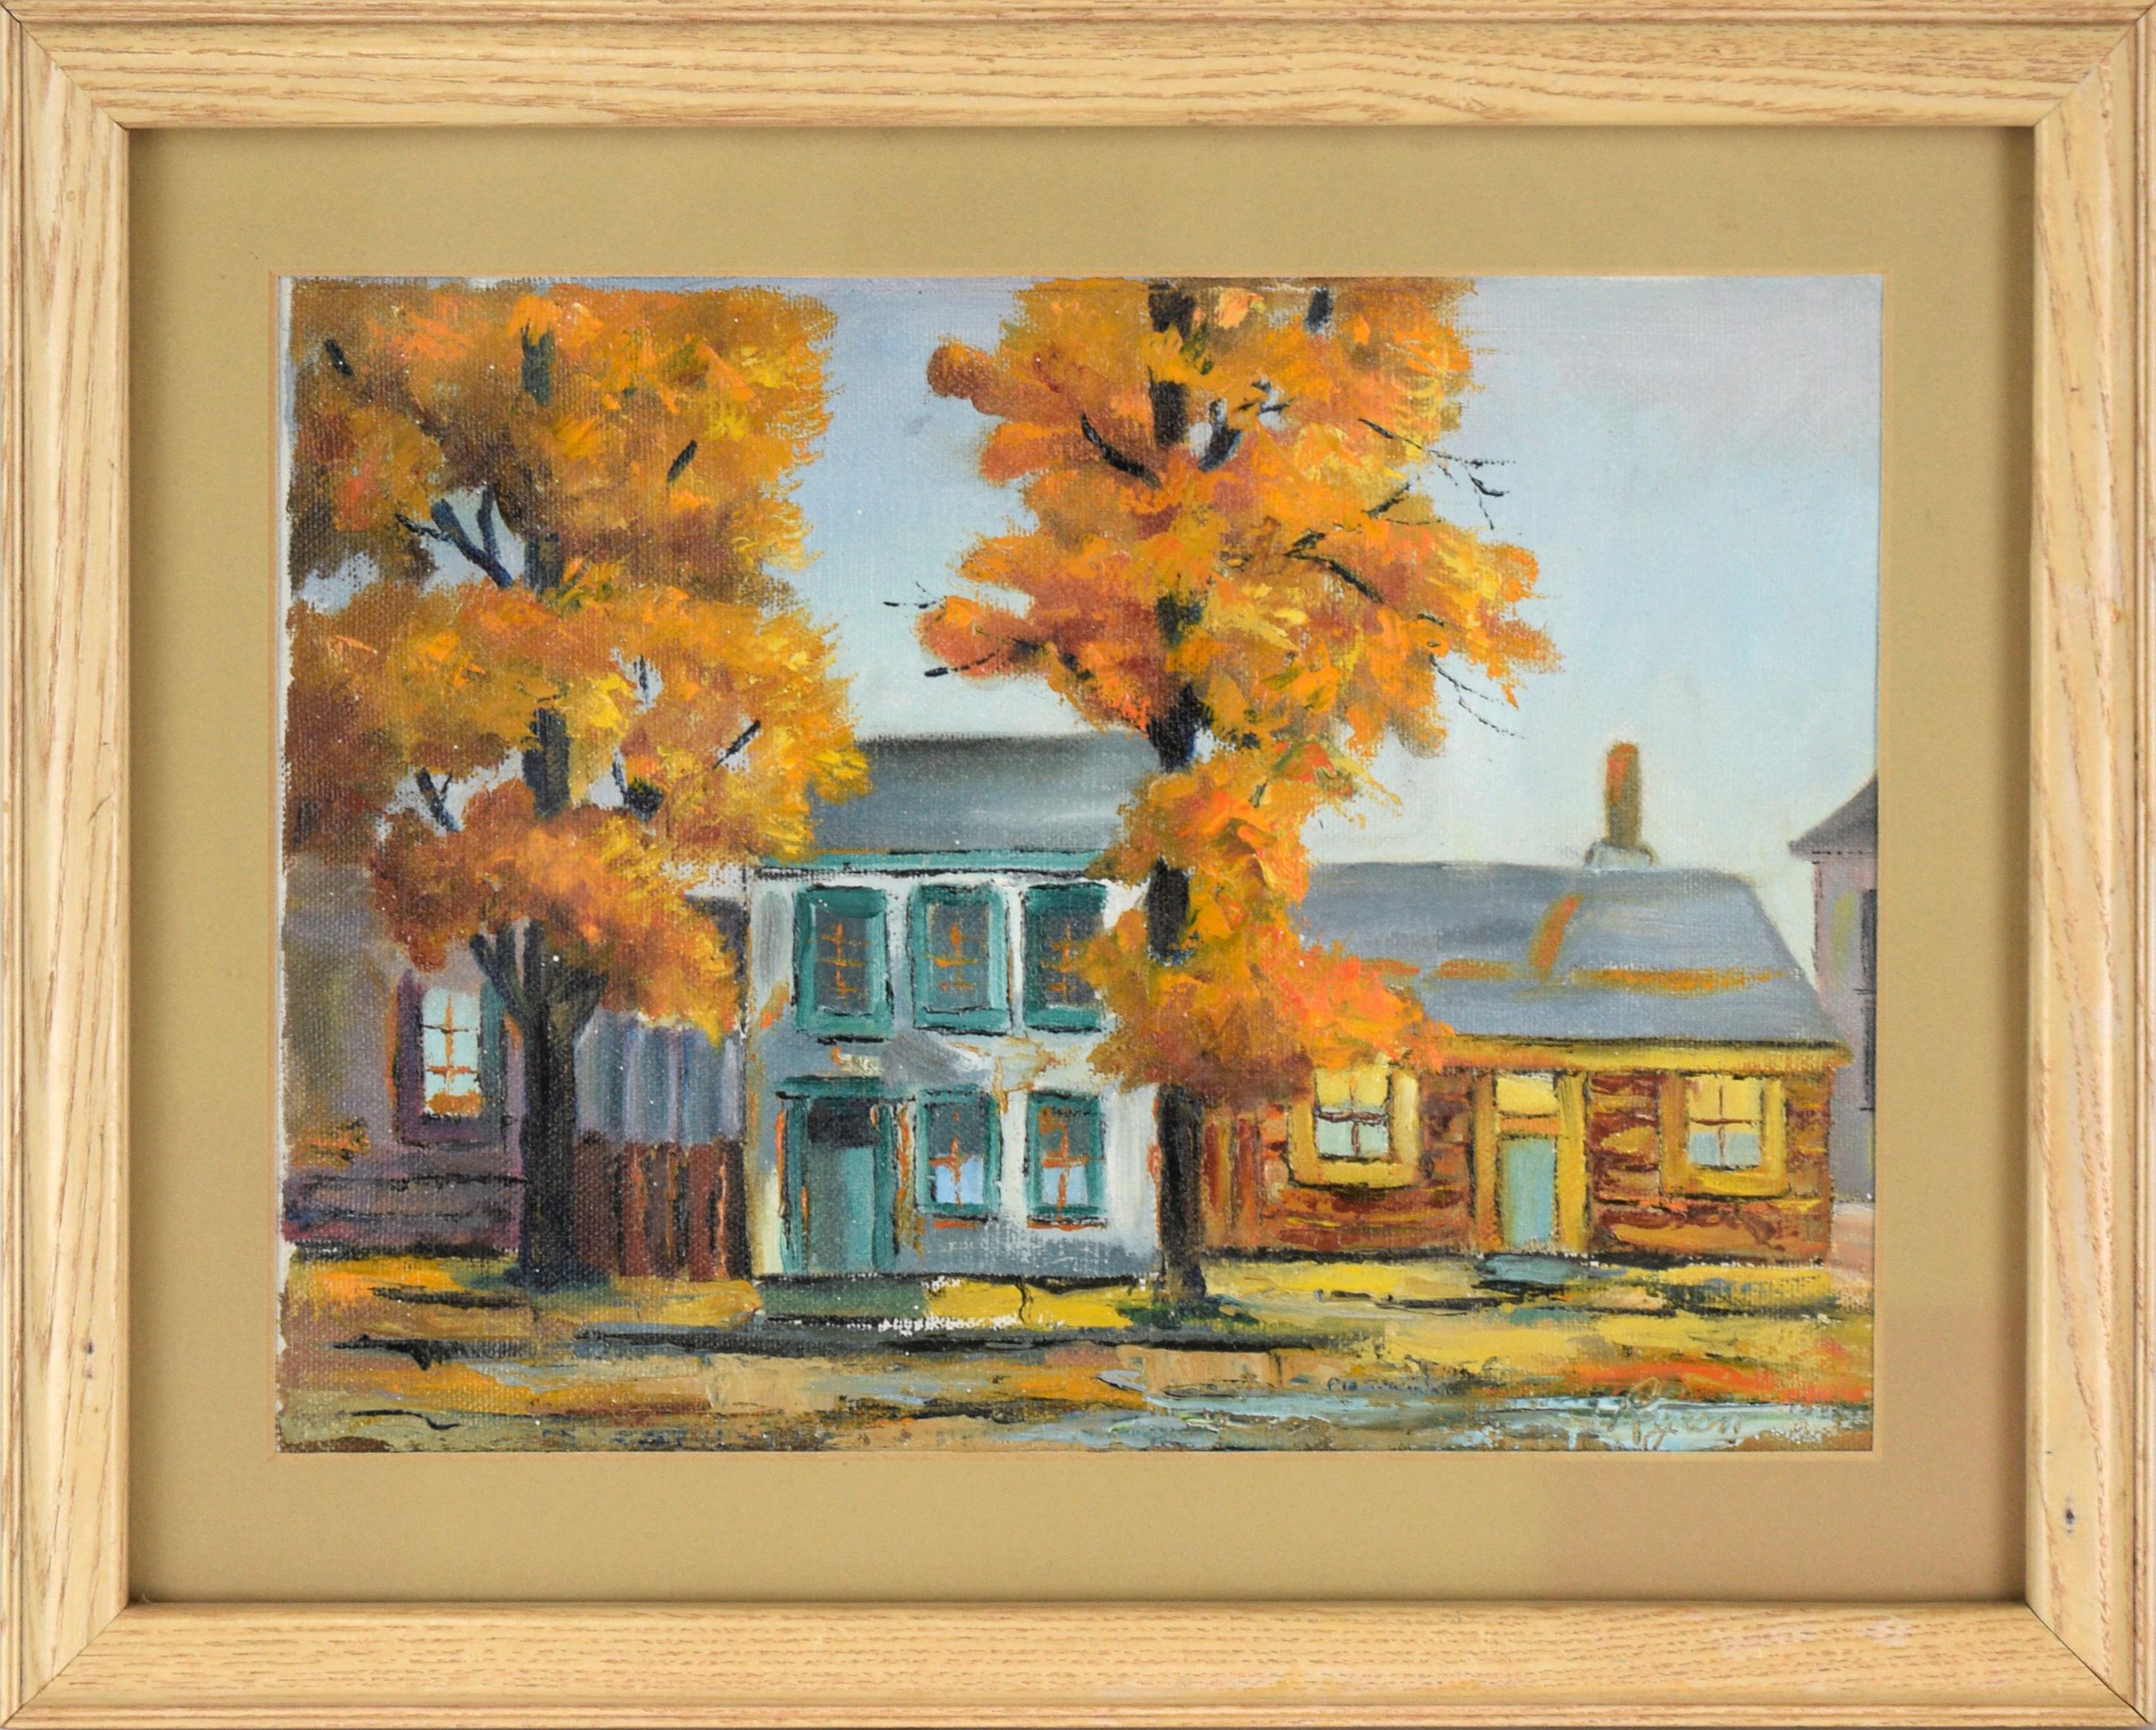 Unknown Landscape Painting - Autumn in the Suburbs, Landscape